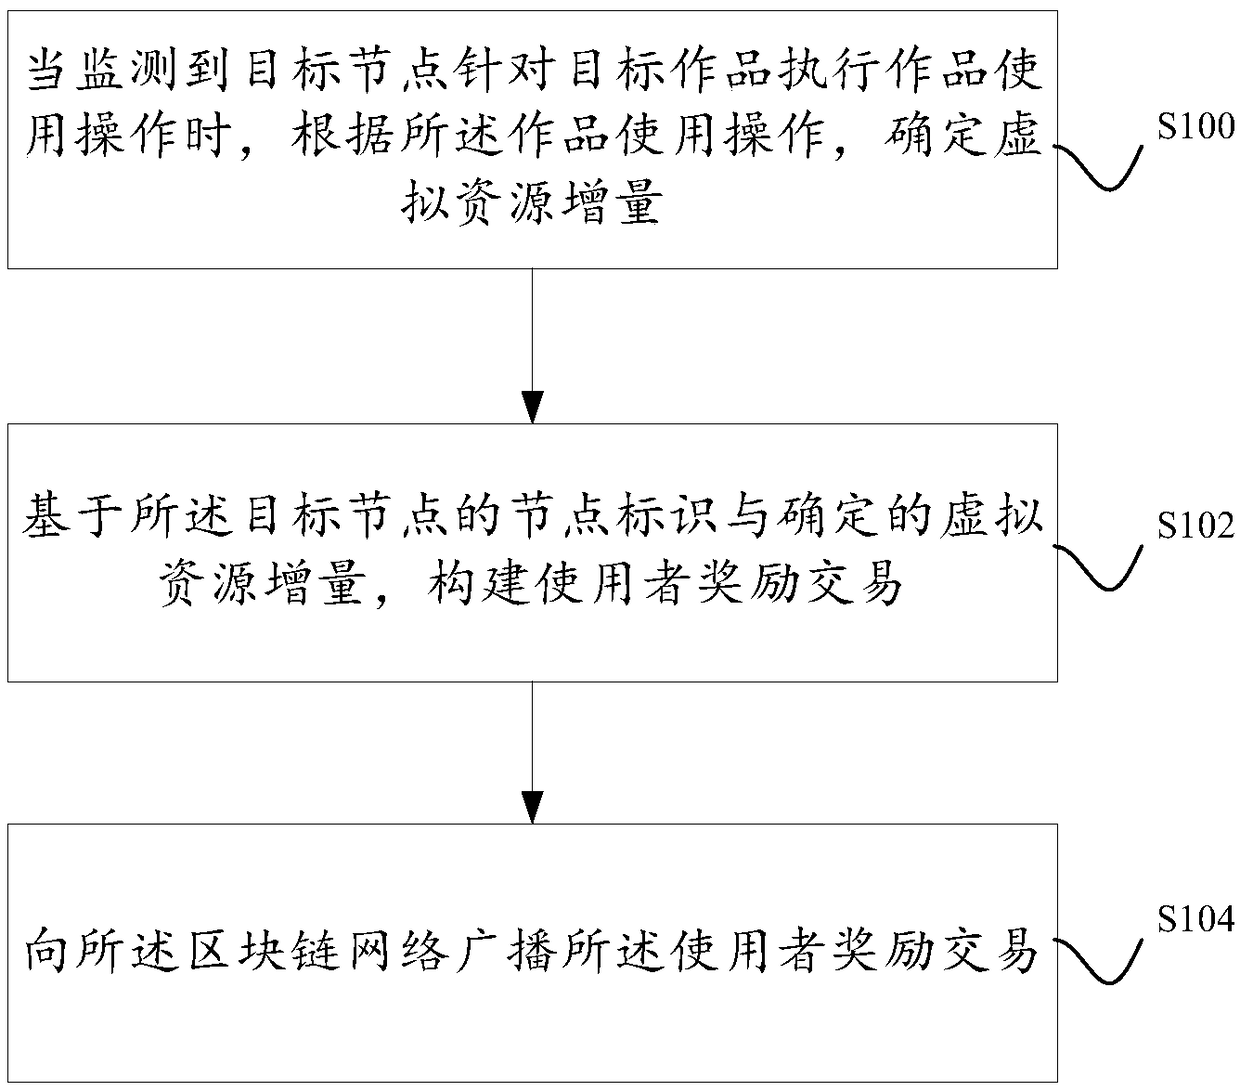 A method and apparatus for awarding a user of a work based on a block chain